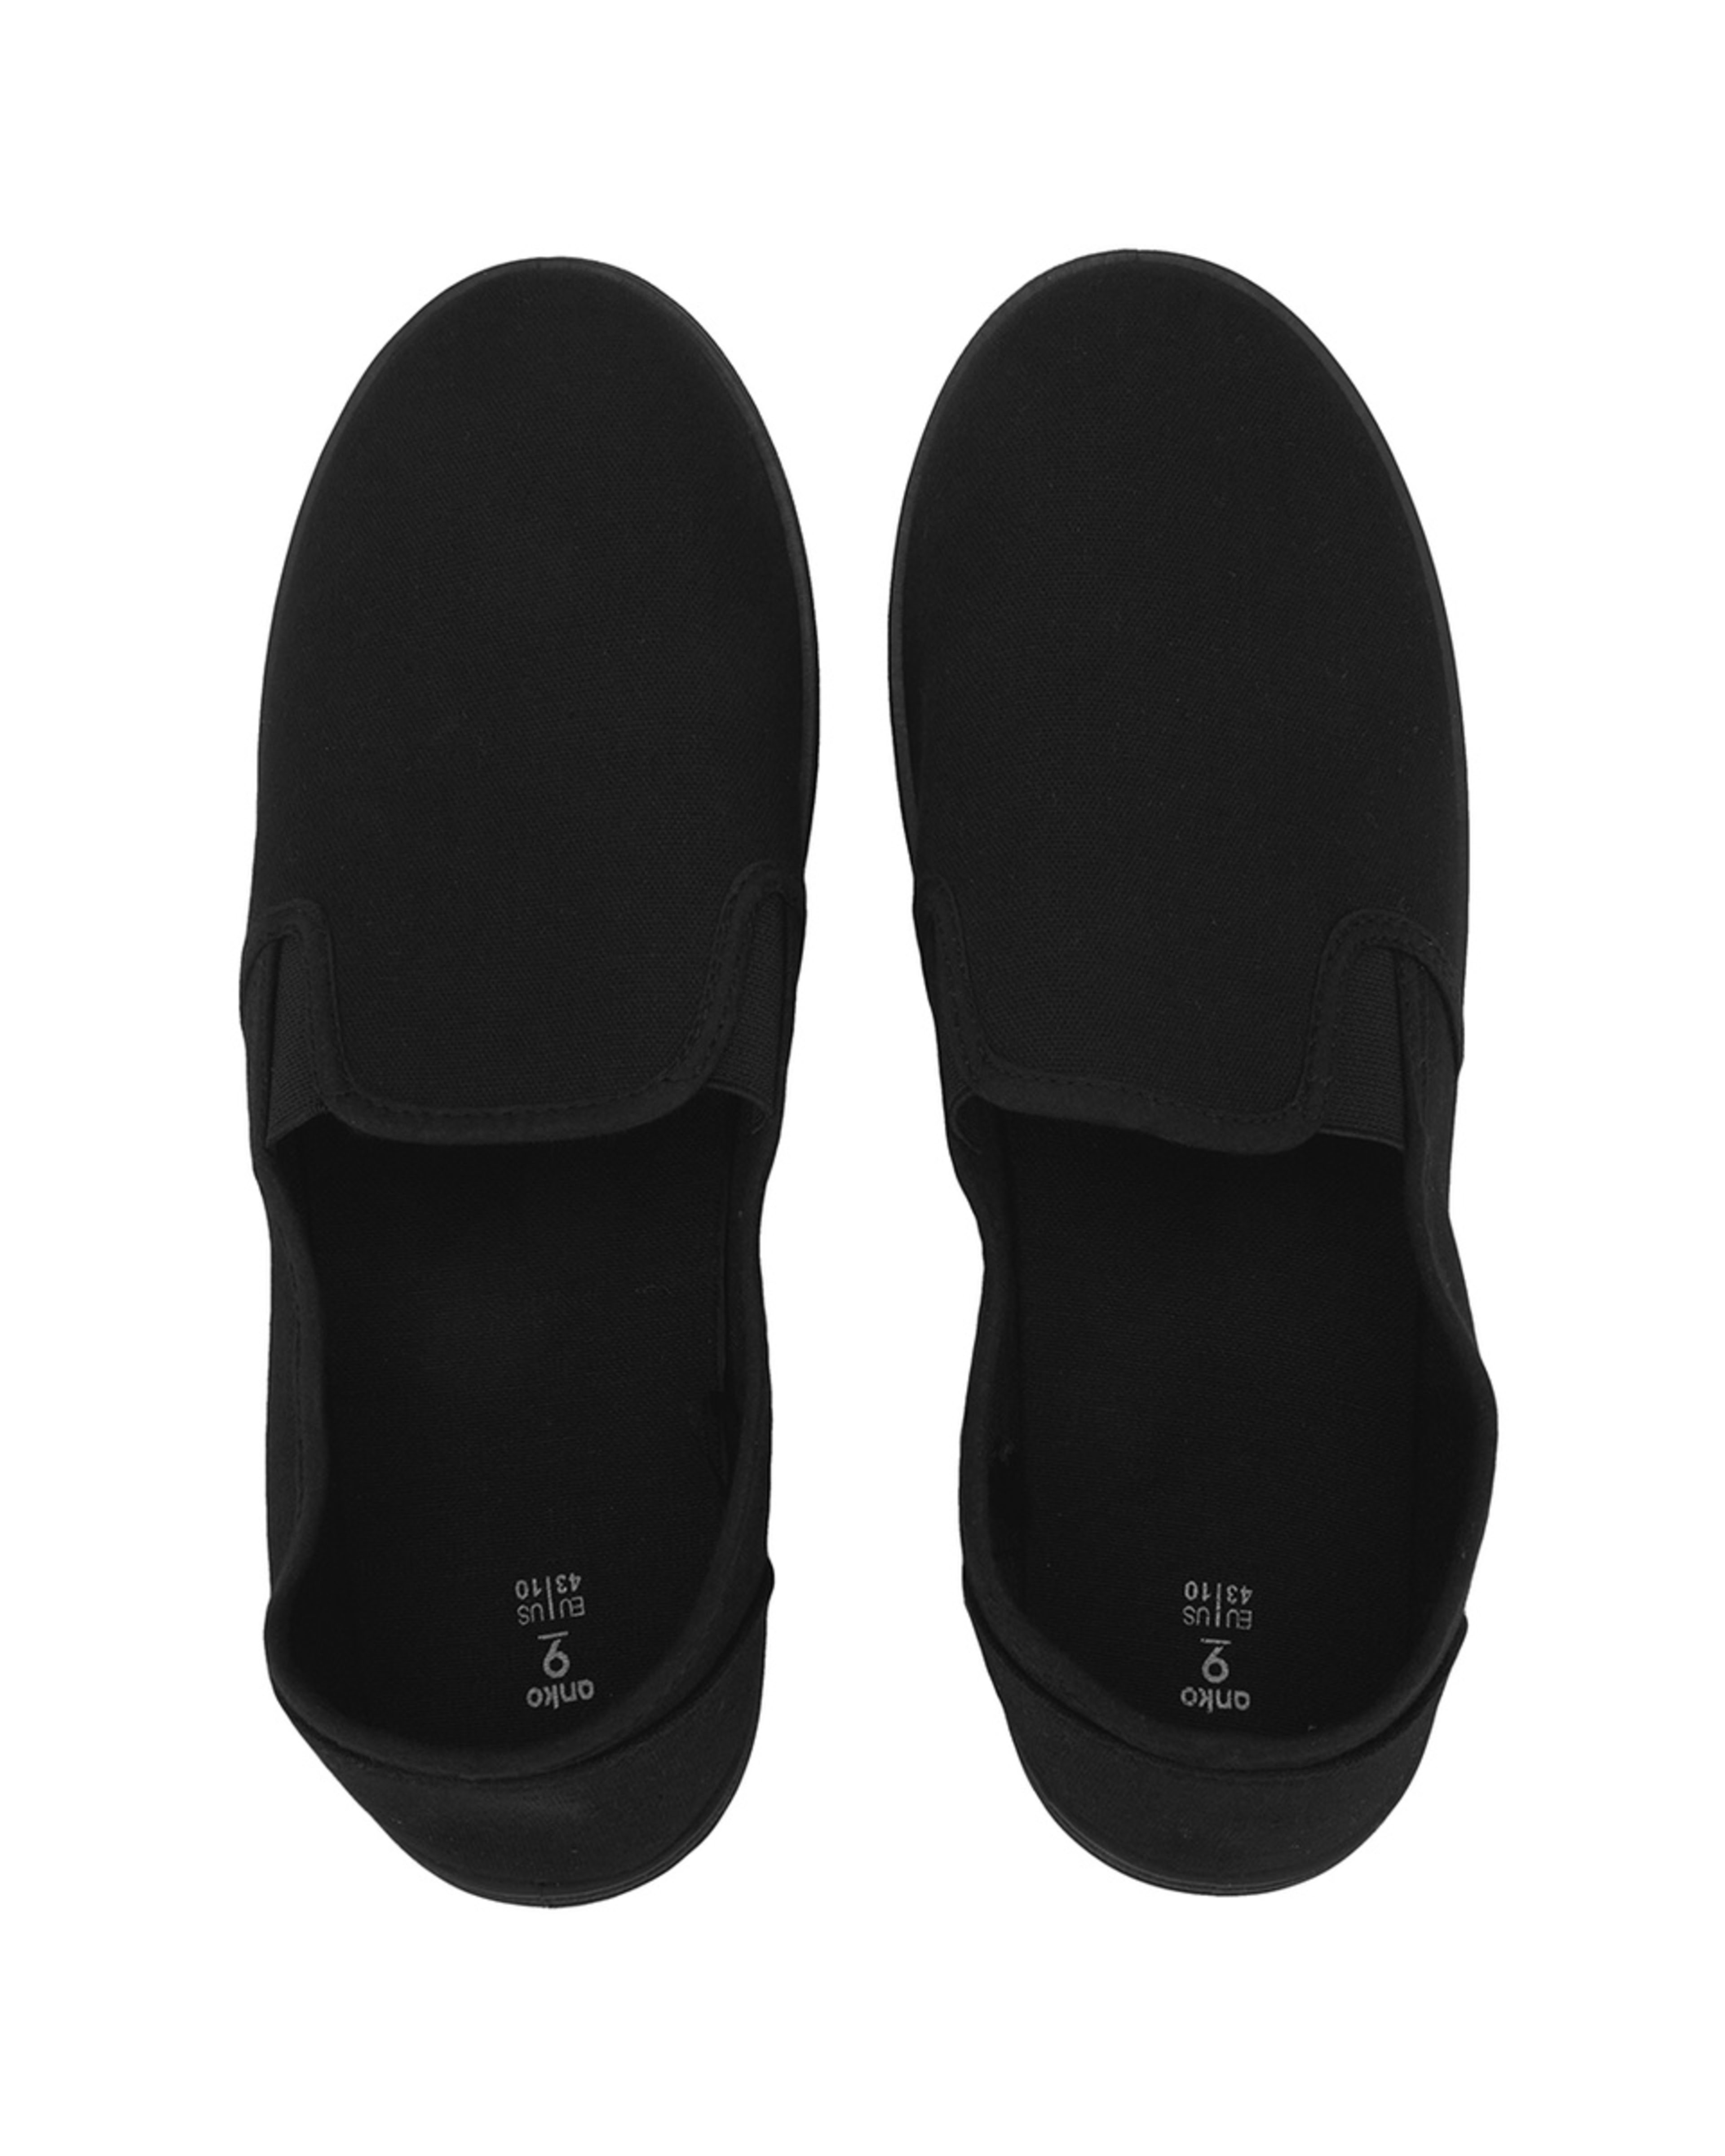 Everyday Canvas Slip On Shoes - Kmart